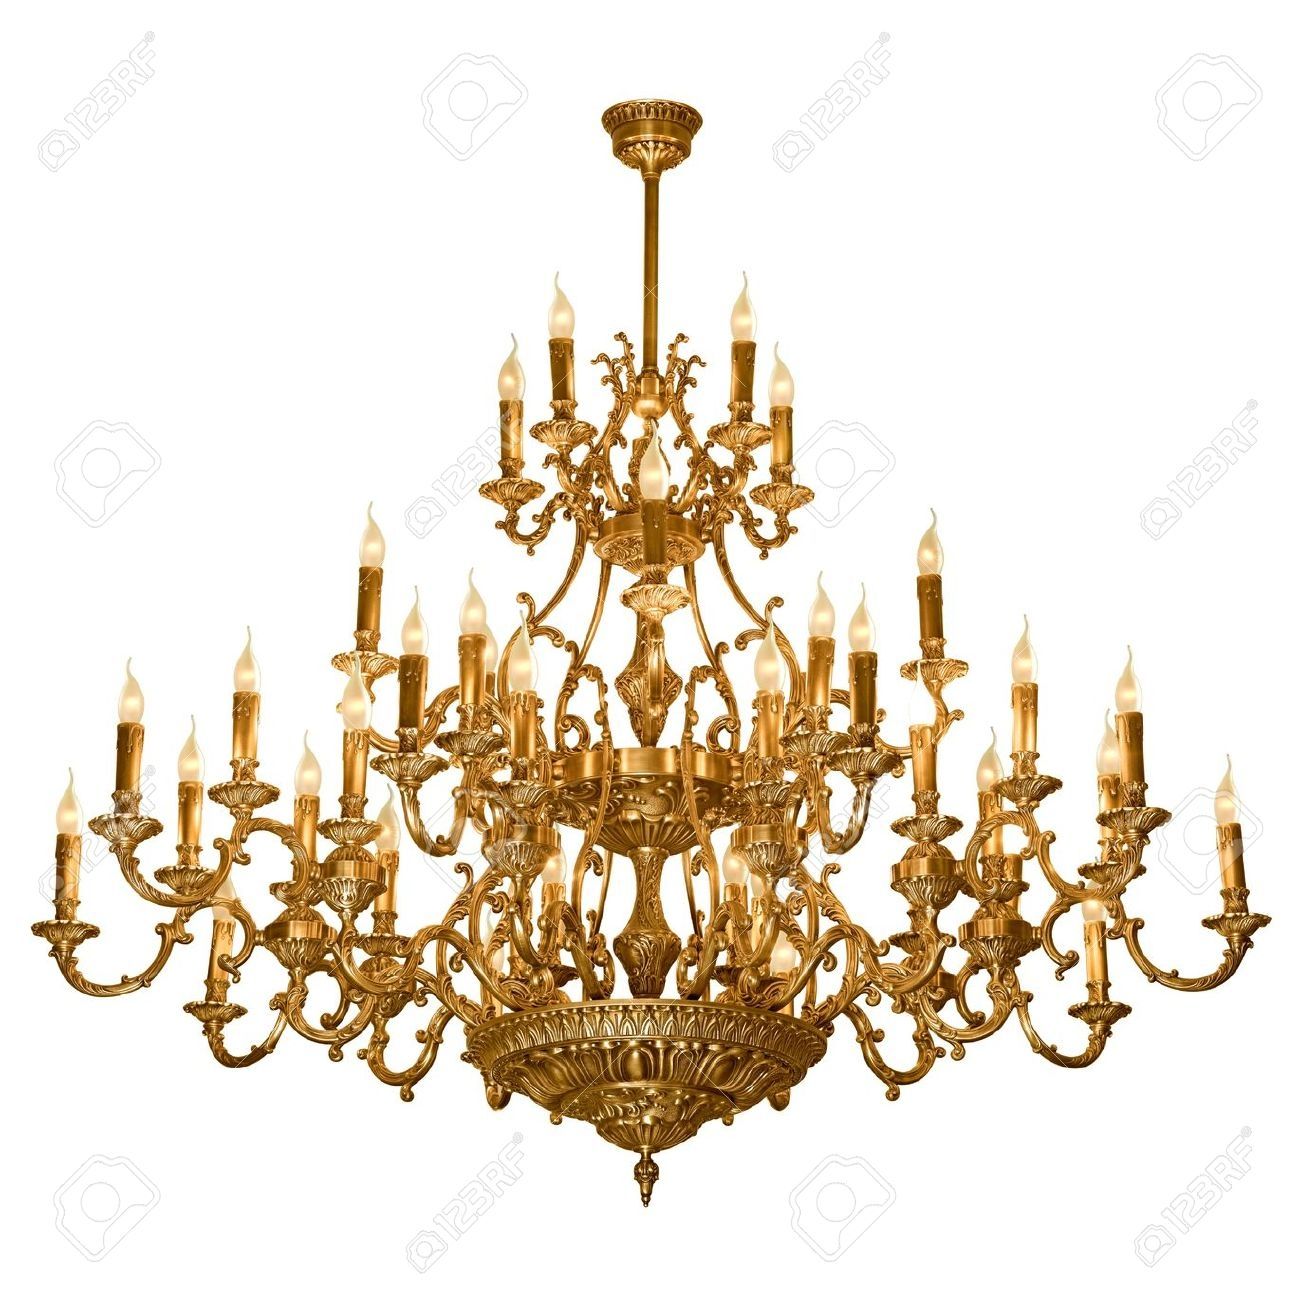 Agreeable Vintage Chandelier For Home Interior Redesign With Throughout Vintage Chandelier (View 12 of 12)